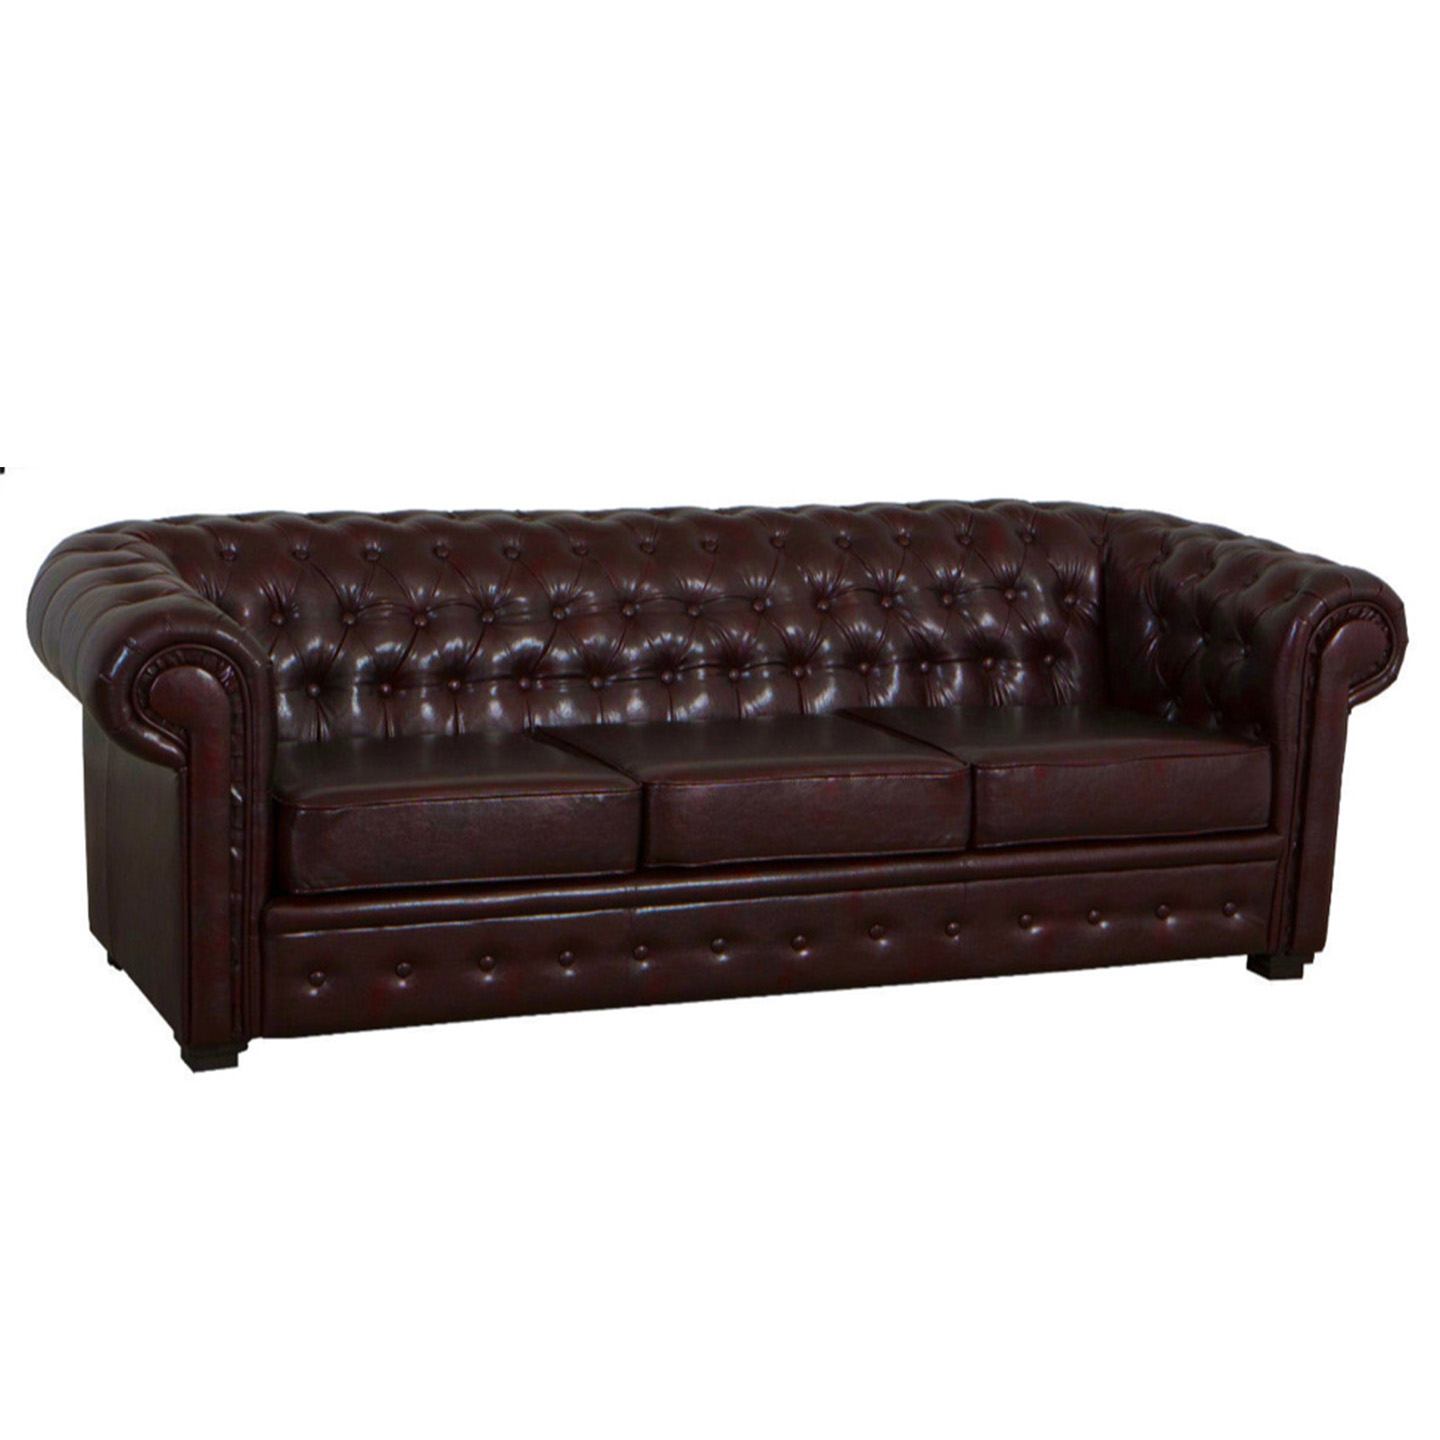 Antique Brown Chesterfield Sofa - Three Seater - Event Furniture by Tarren